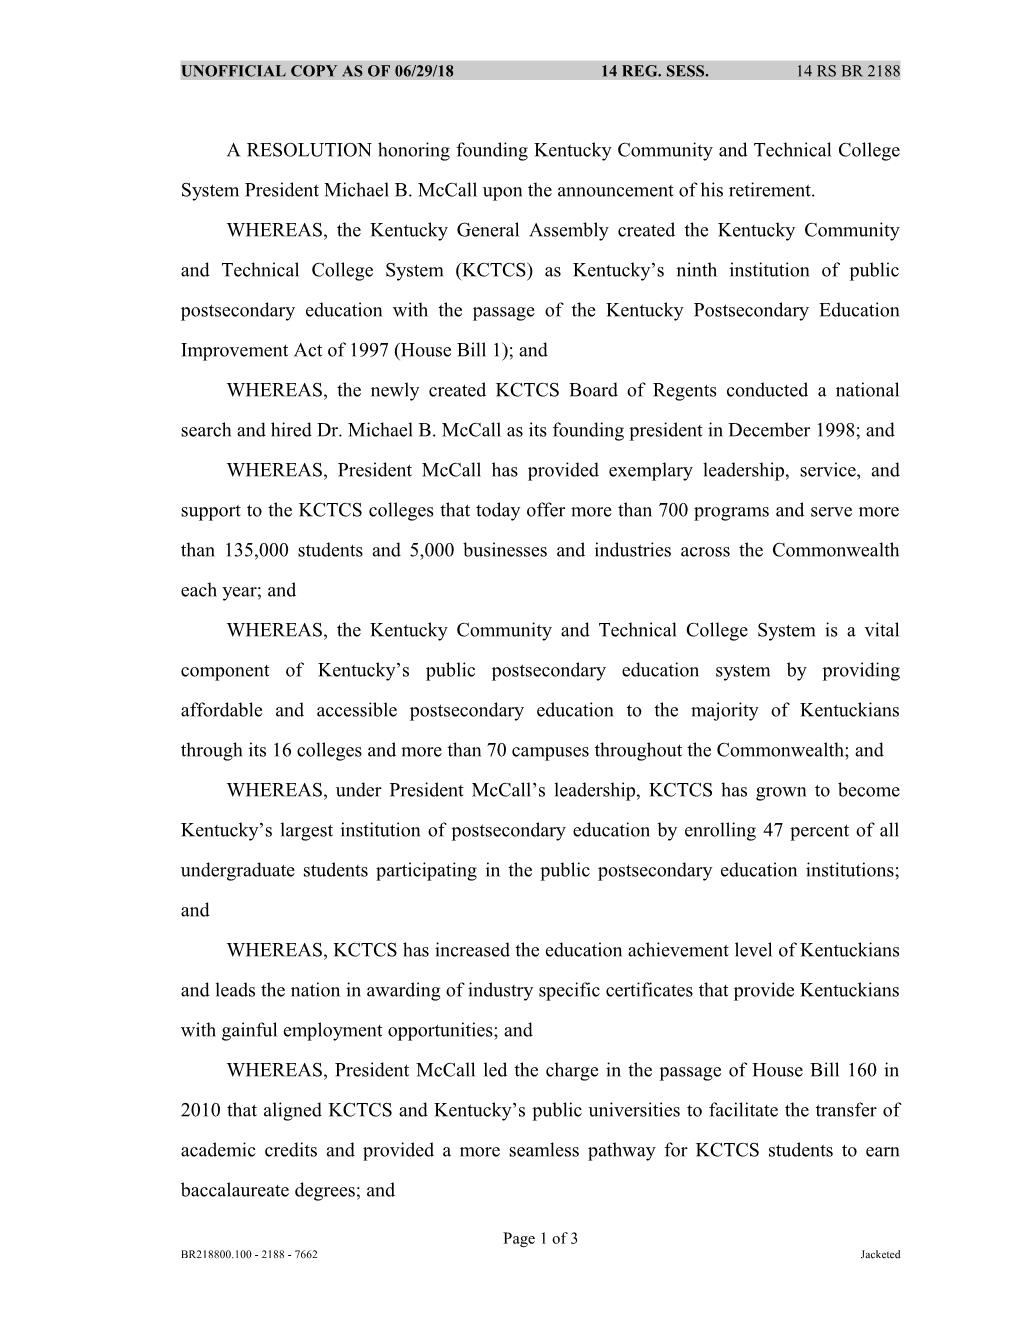 A RESOLUTION Honoring Founding Kentucky Community and Technical College System President